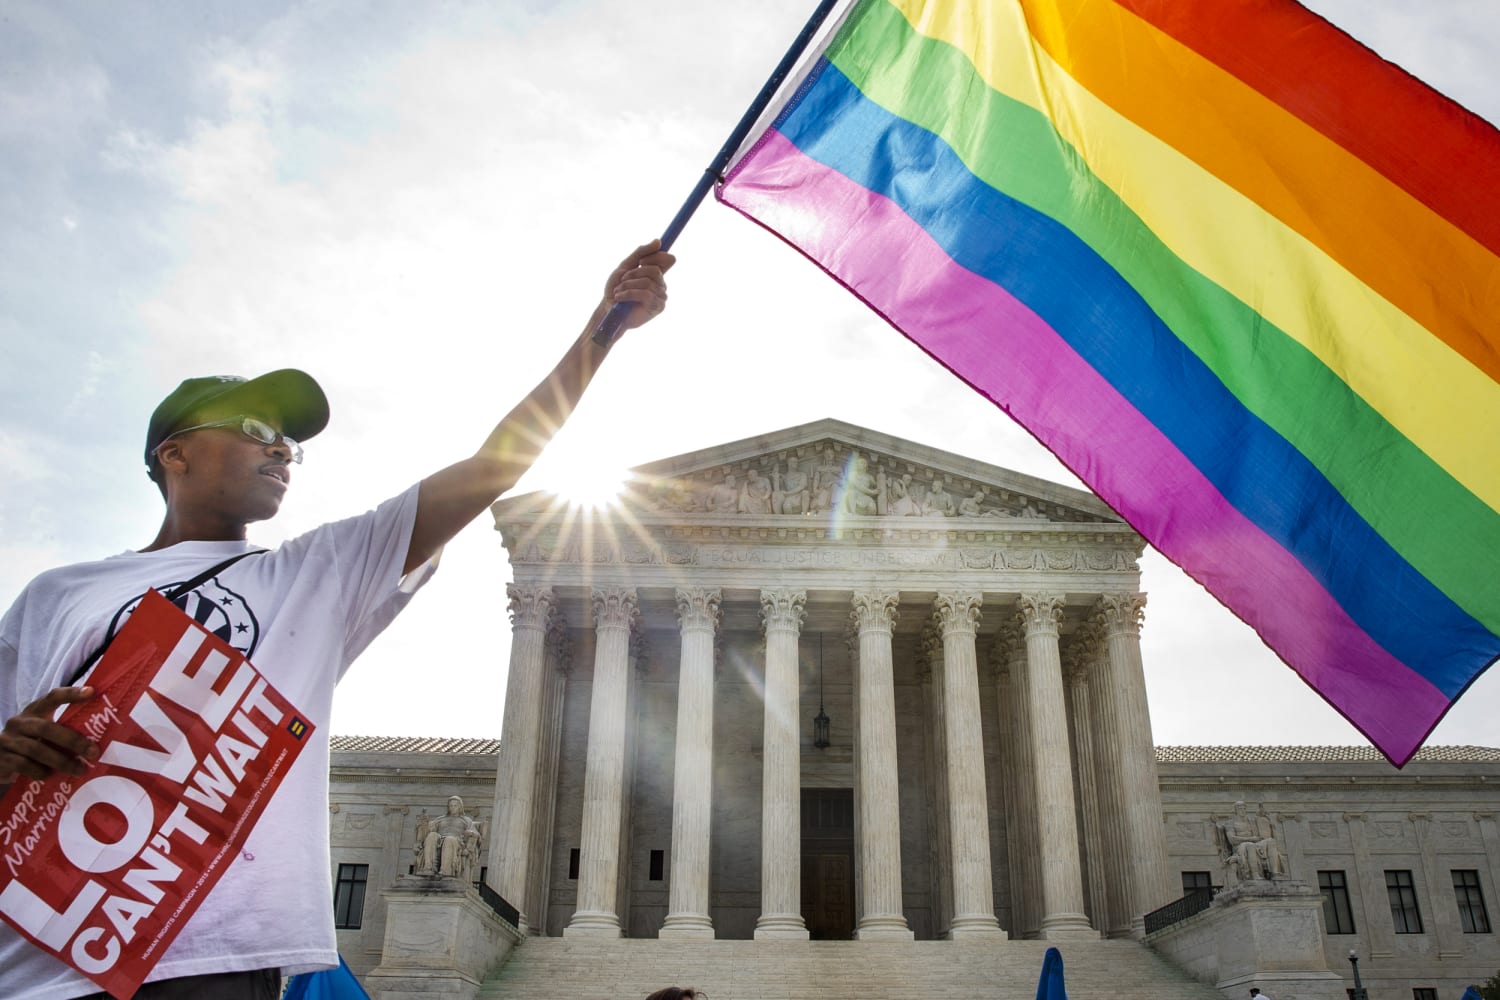 As high court signals Roe v. Wade reversal, states eye same-sex marriage protections